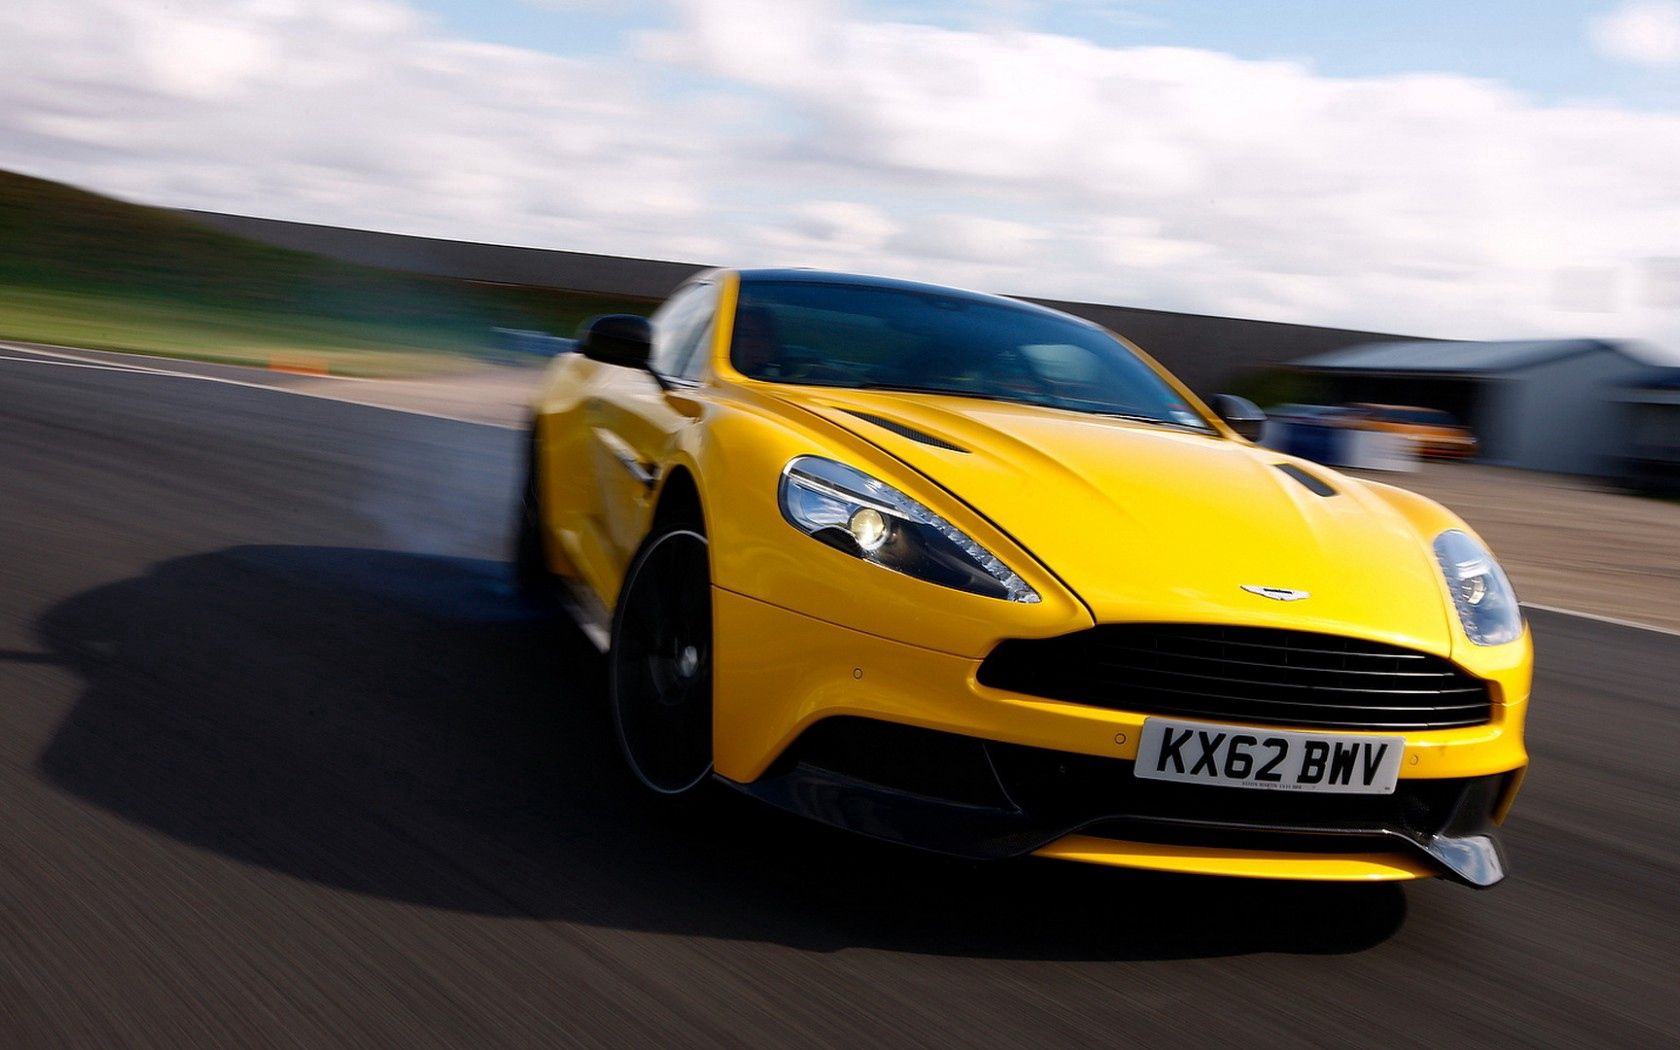 cars, yellow, aston martin, road, blur, smooth, speed, supercar, front end, limber